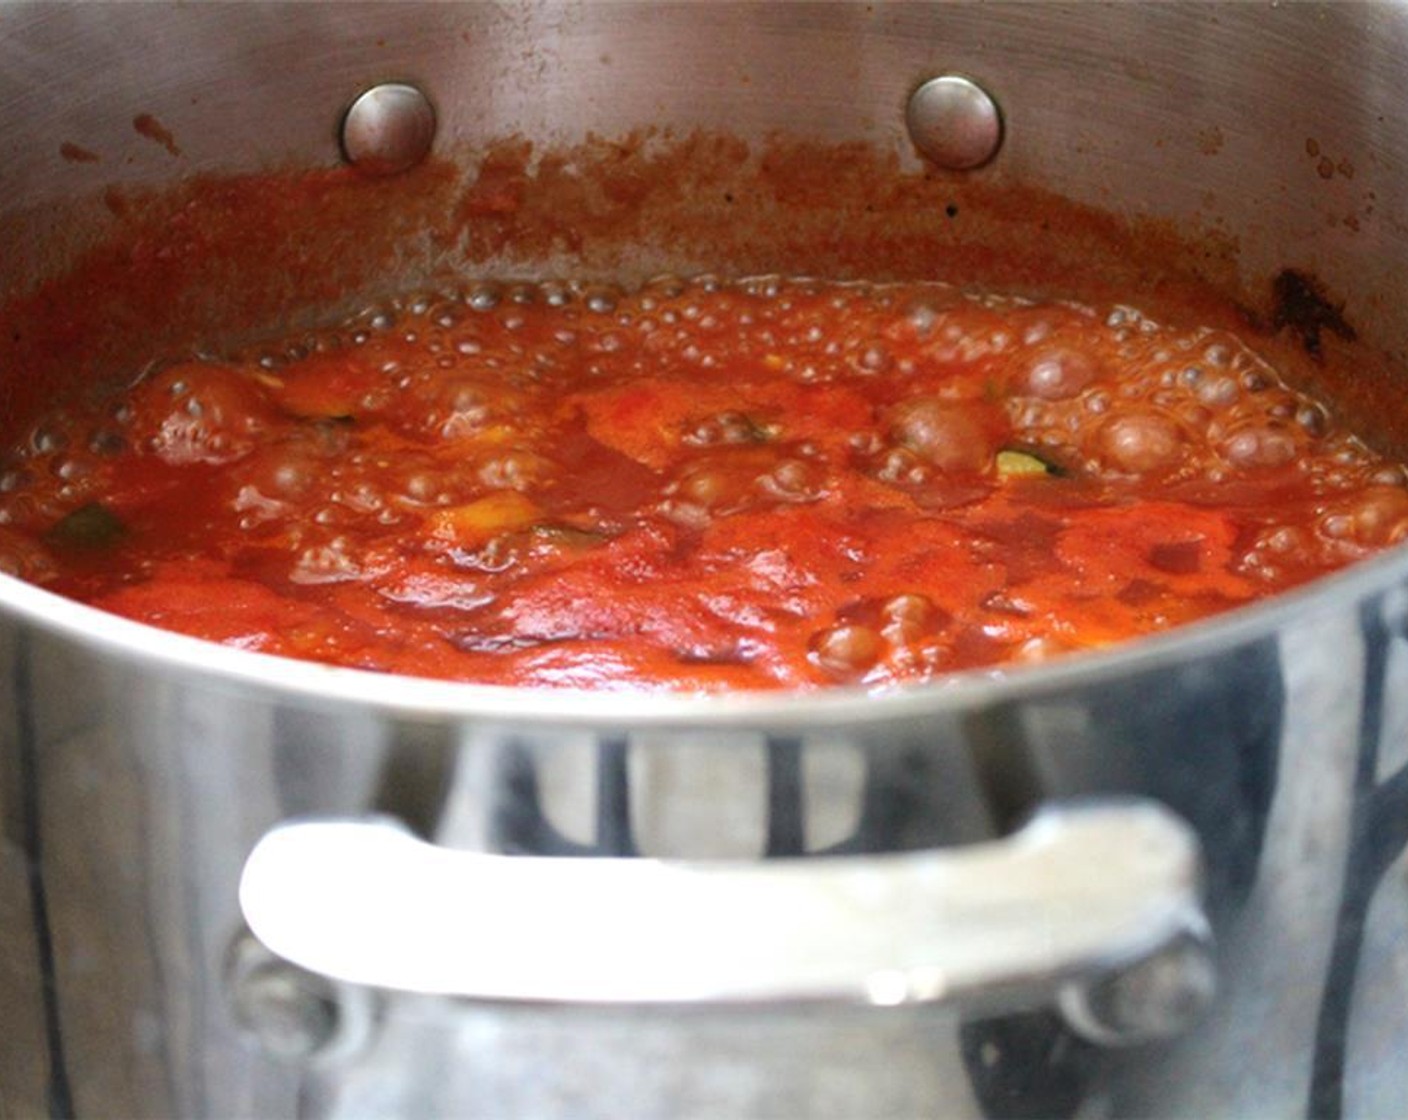 step 2 Add Chili Pepper (1/2) and cook for 2 minutes. Add Garlic (3 cloves) and cook for 1 minute more. Add Canned Crushed Tomatoes (2 cups), Water (3 cups), and Maple Syrup (1 Tbsp). Bring to a boil, then reduce to a simmer and cook for about 10 minutes.